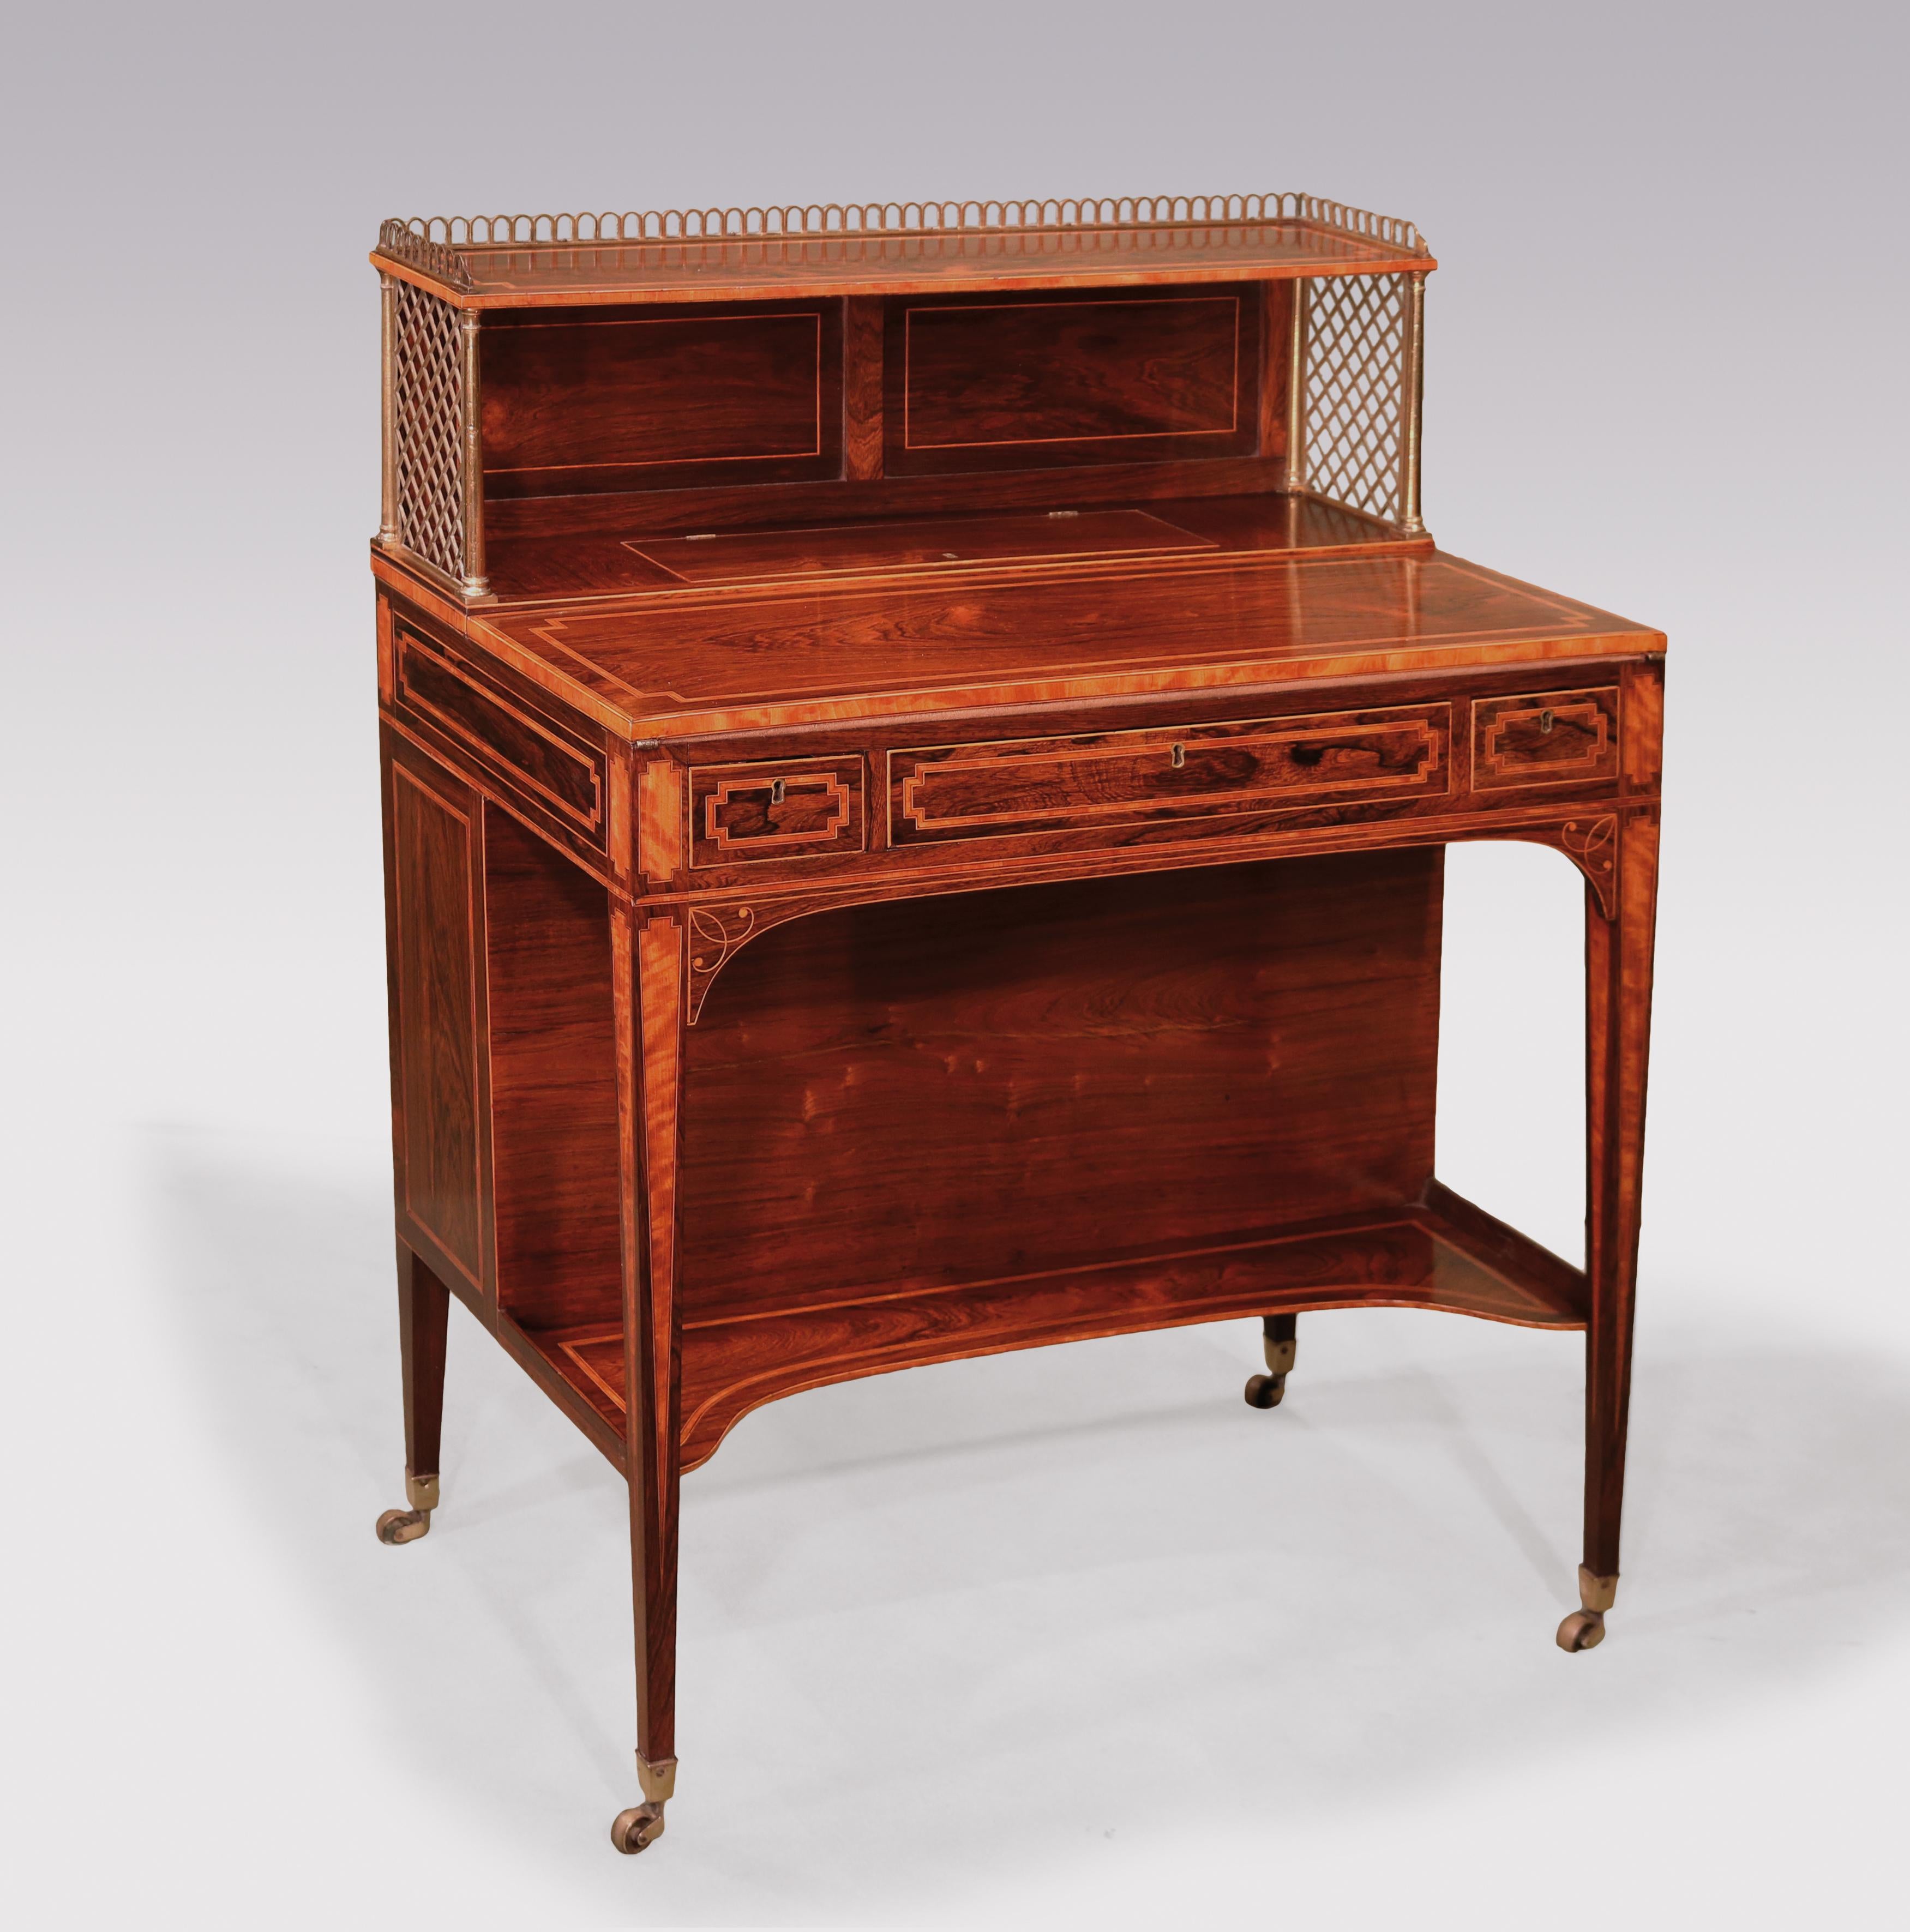 An unusual late 18th century Sheraton period rosewood artist's Bonheur du Jour boxwood and ebony strung and satinwood banded throughout, having brass galleried upper part above fold-over top revealing red leather writing surface and concealed